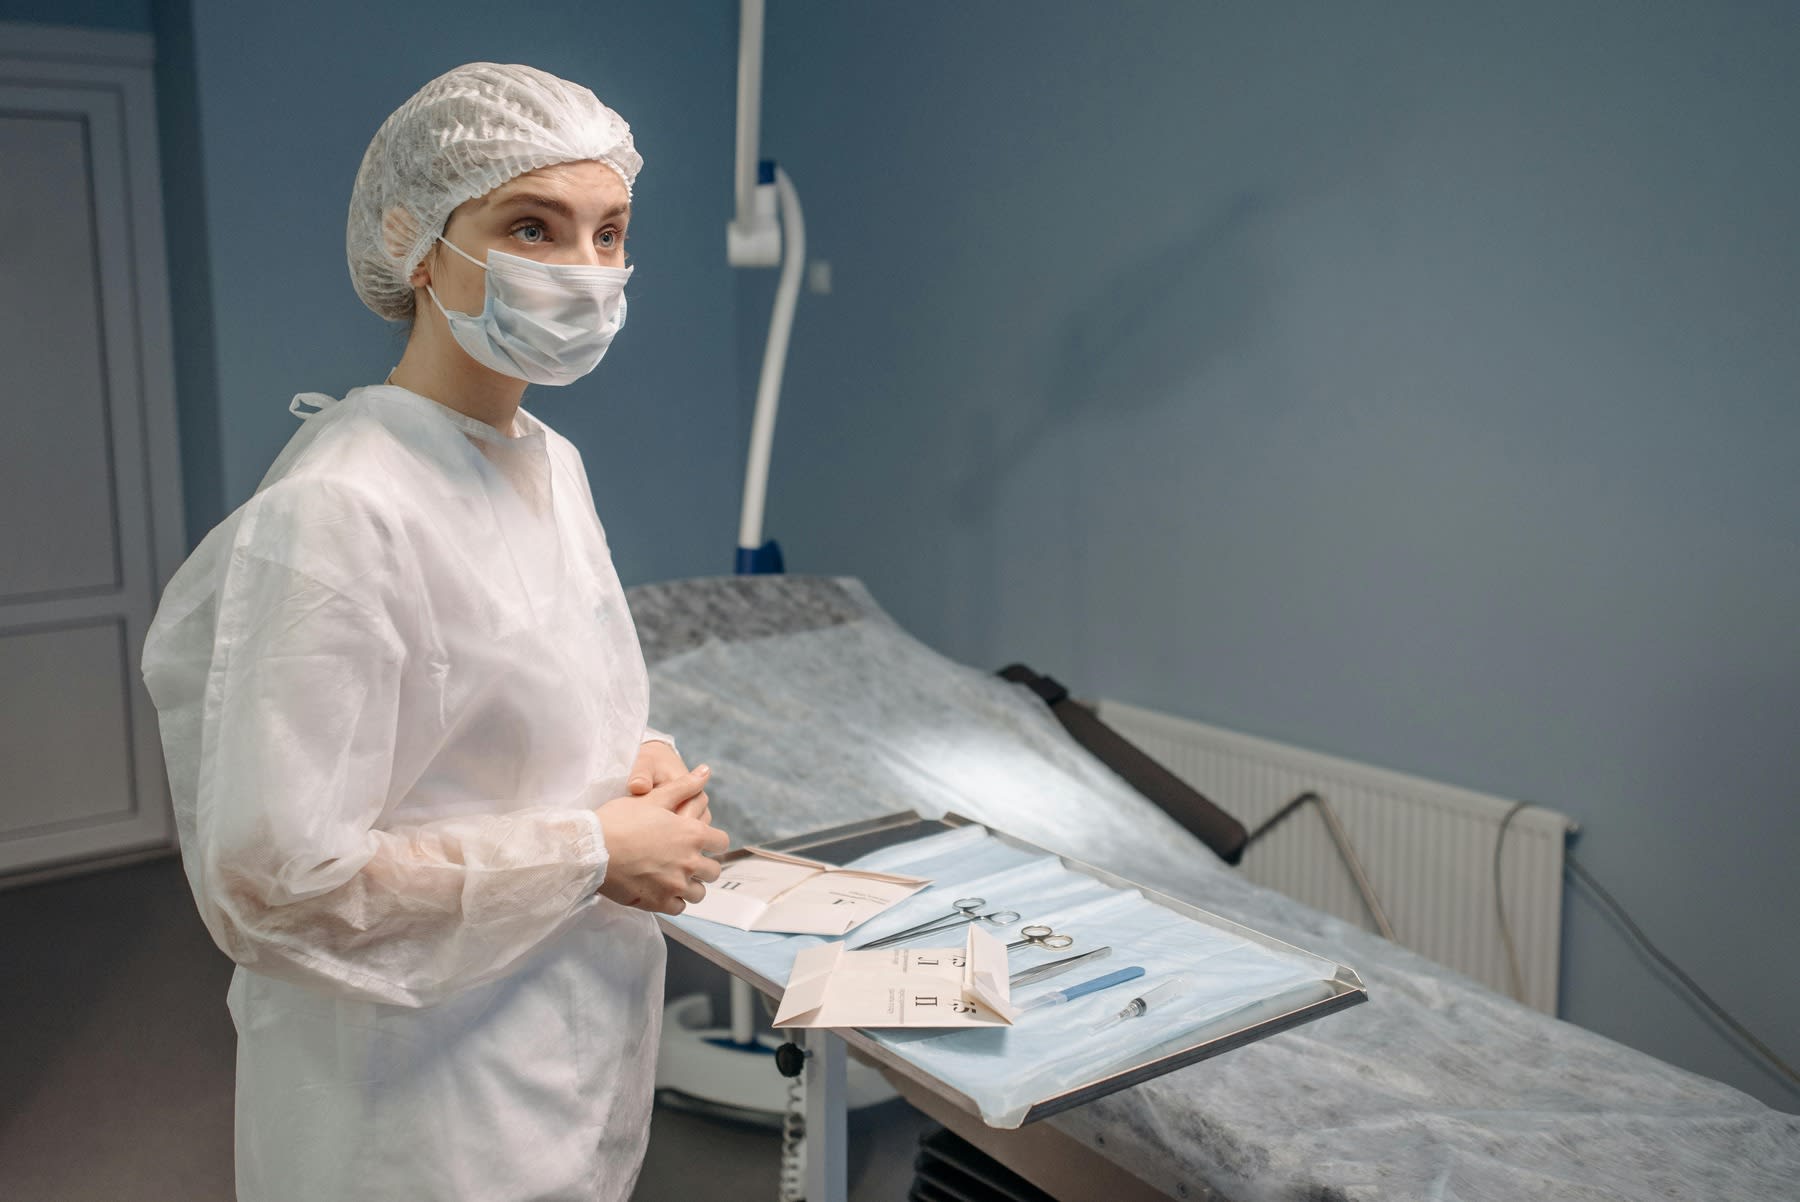 Nurse wearing protective uniform while preparing for a surgery